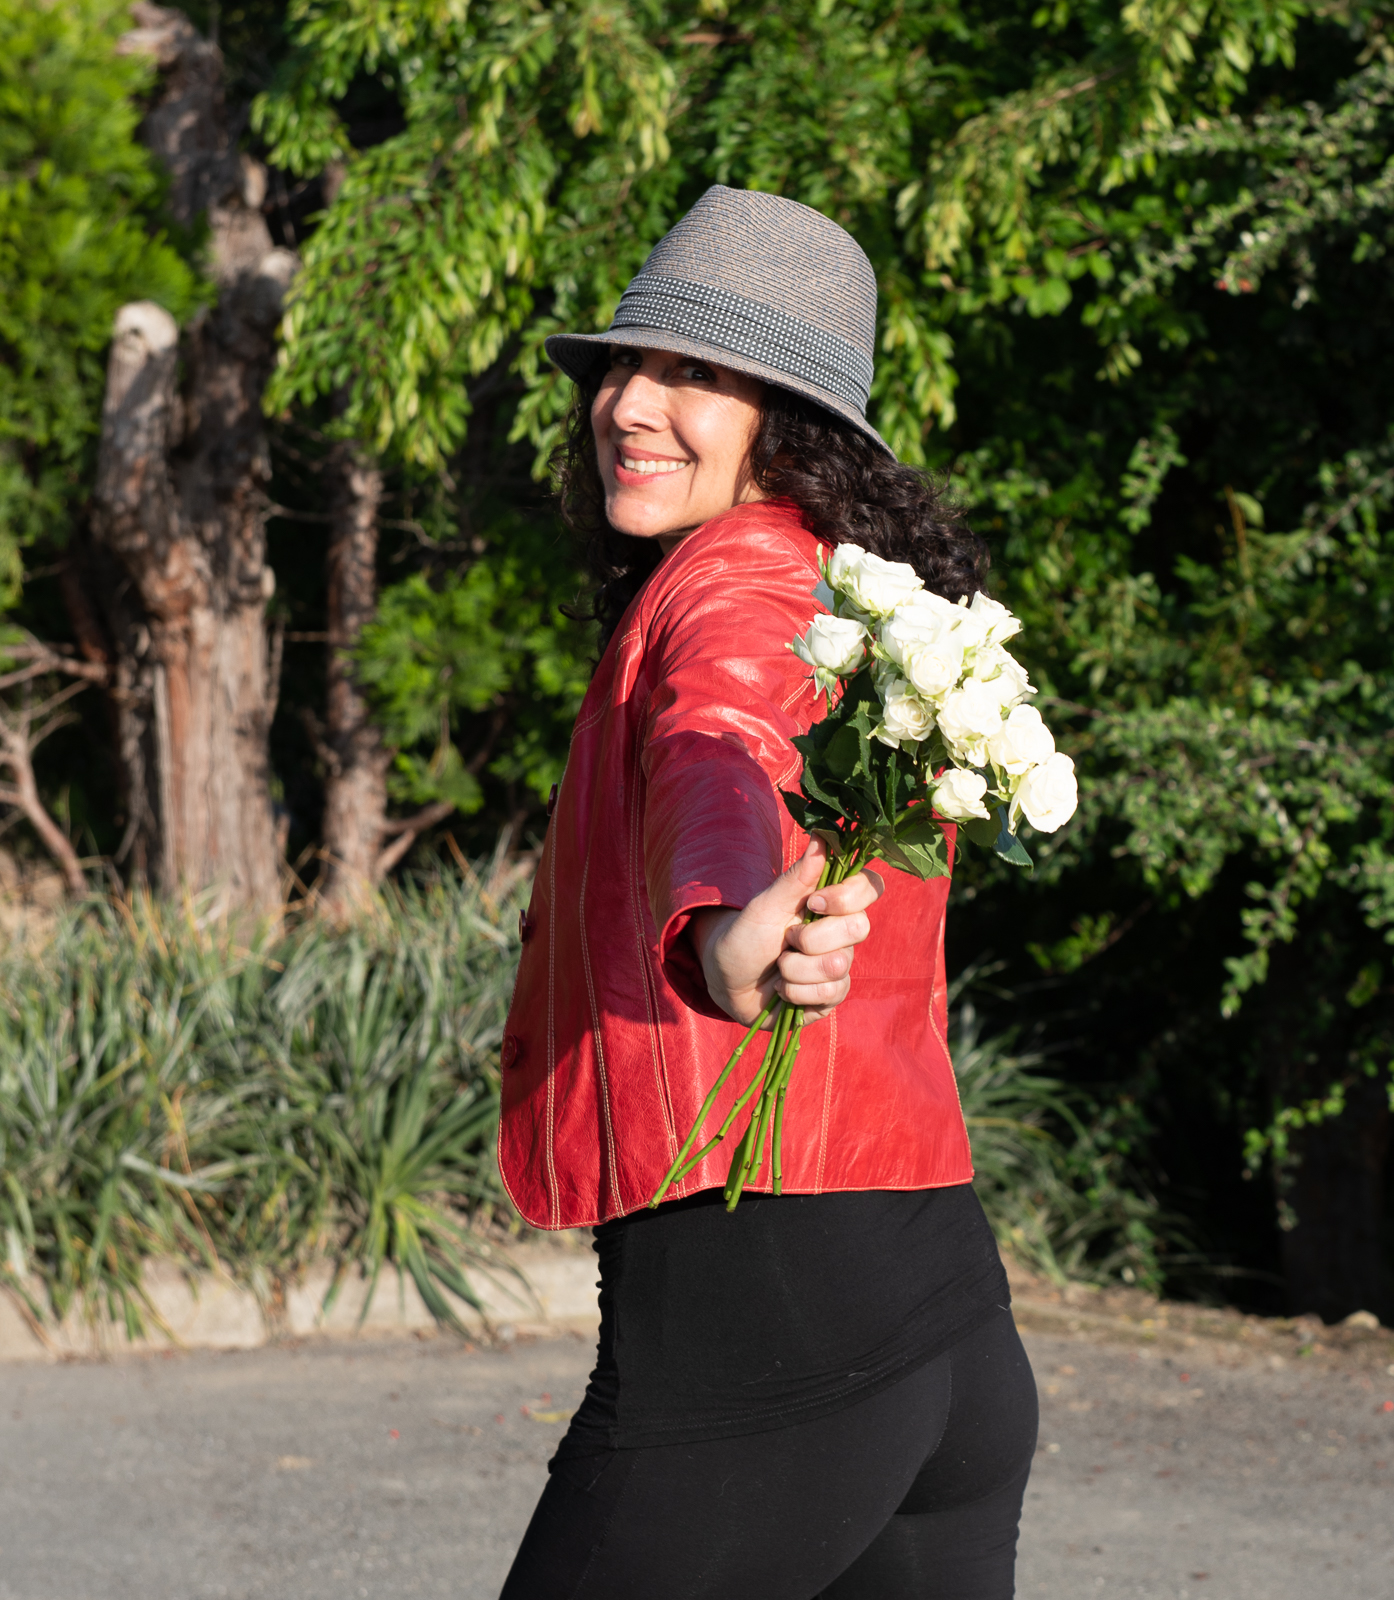 Angela Luna with a bouquet of flowers on the street, smiling.